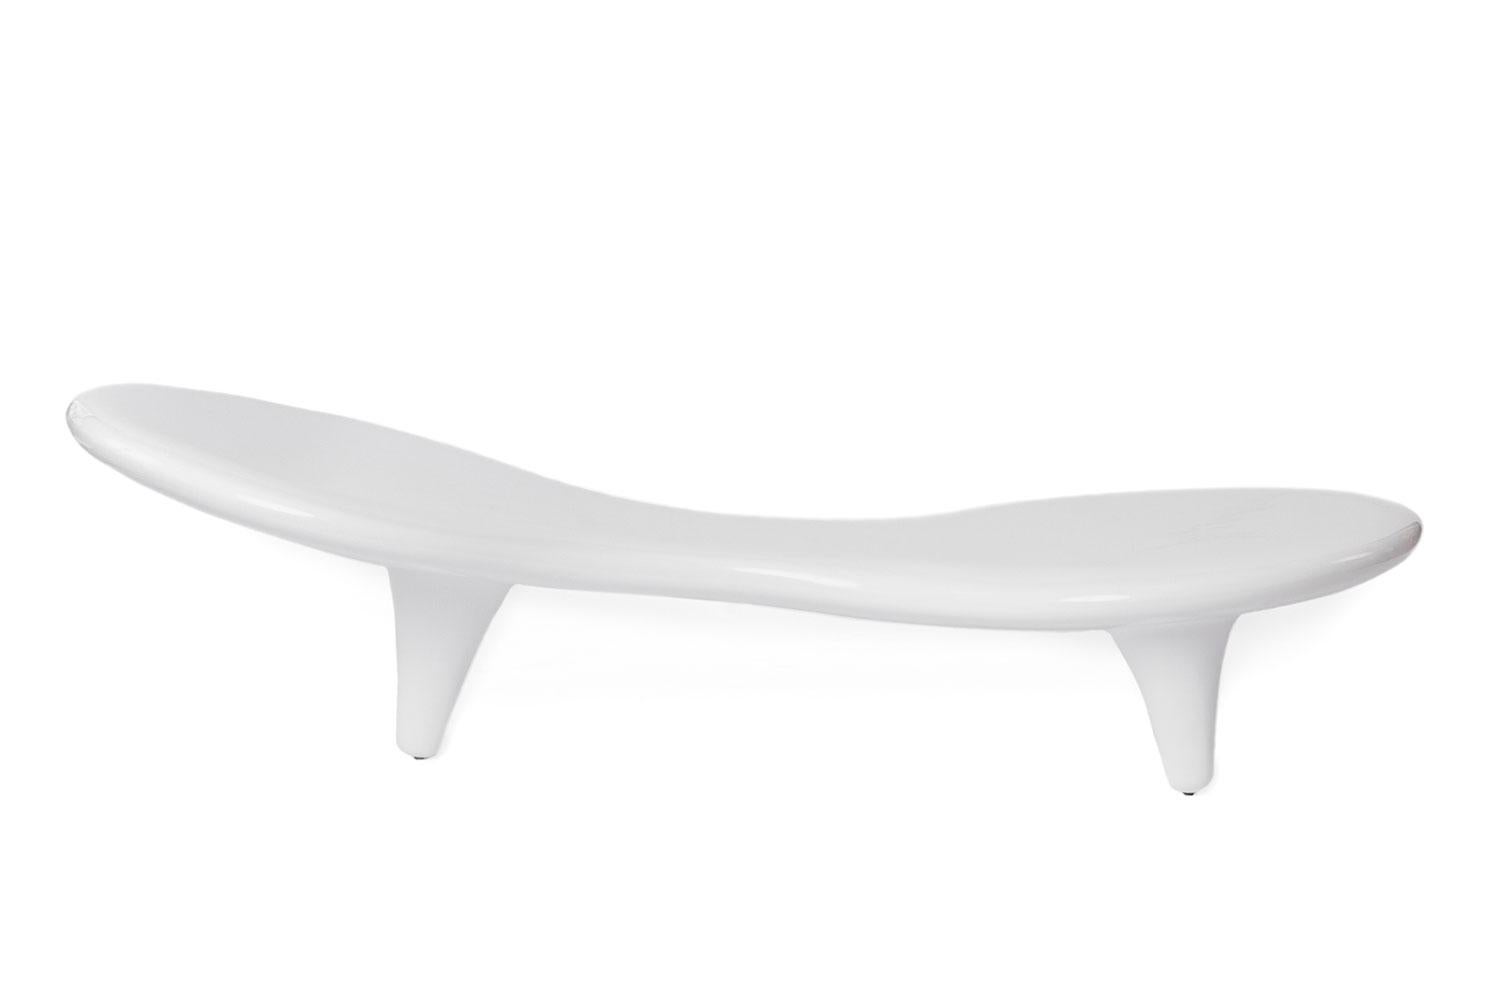 Orgone bench by Cappellini

Suitable for use in indoor and outdoor settings, the Orgone bench is one of the most iconic pieces designed by Marc Newson. This chaise longue has fluid lines and is made entirely of glossy lacquered fibreglass.

Most